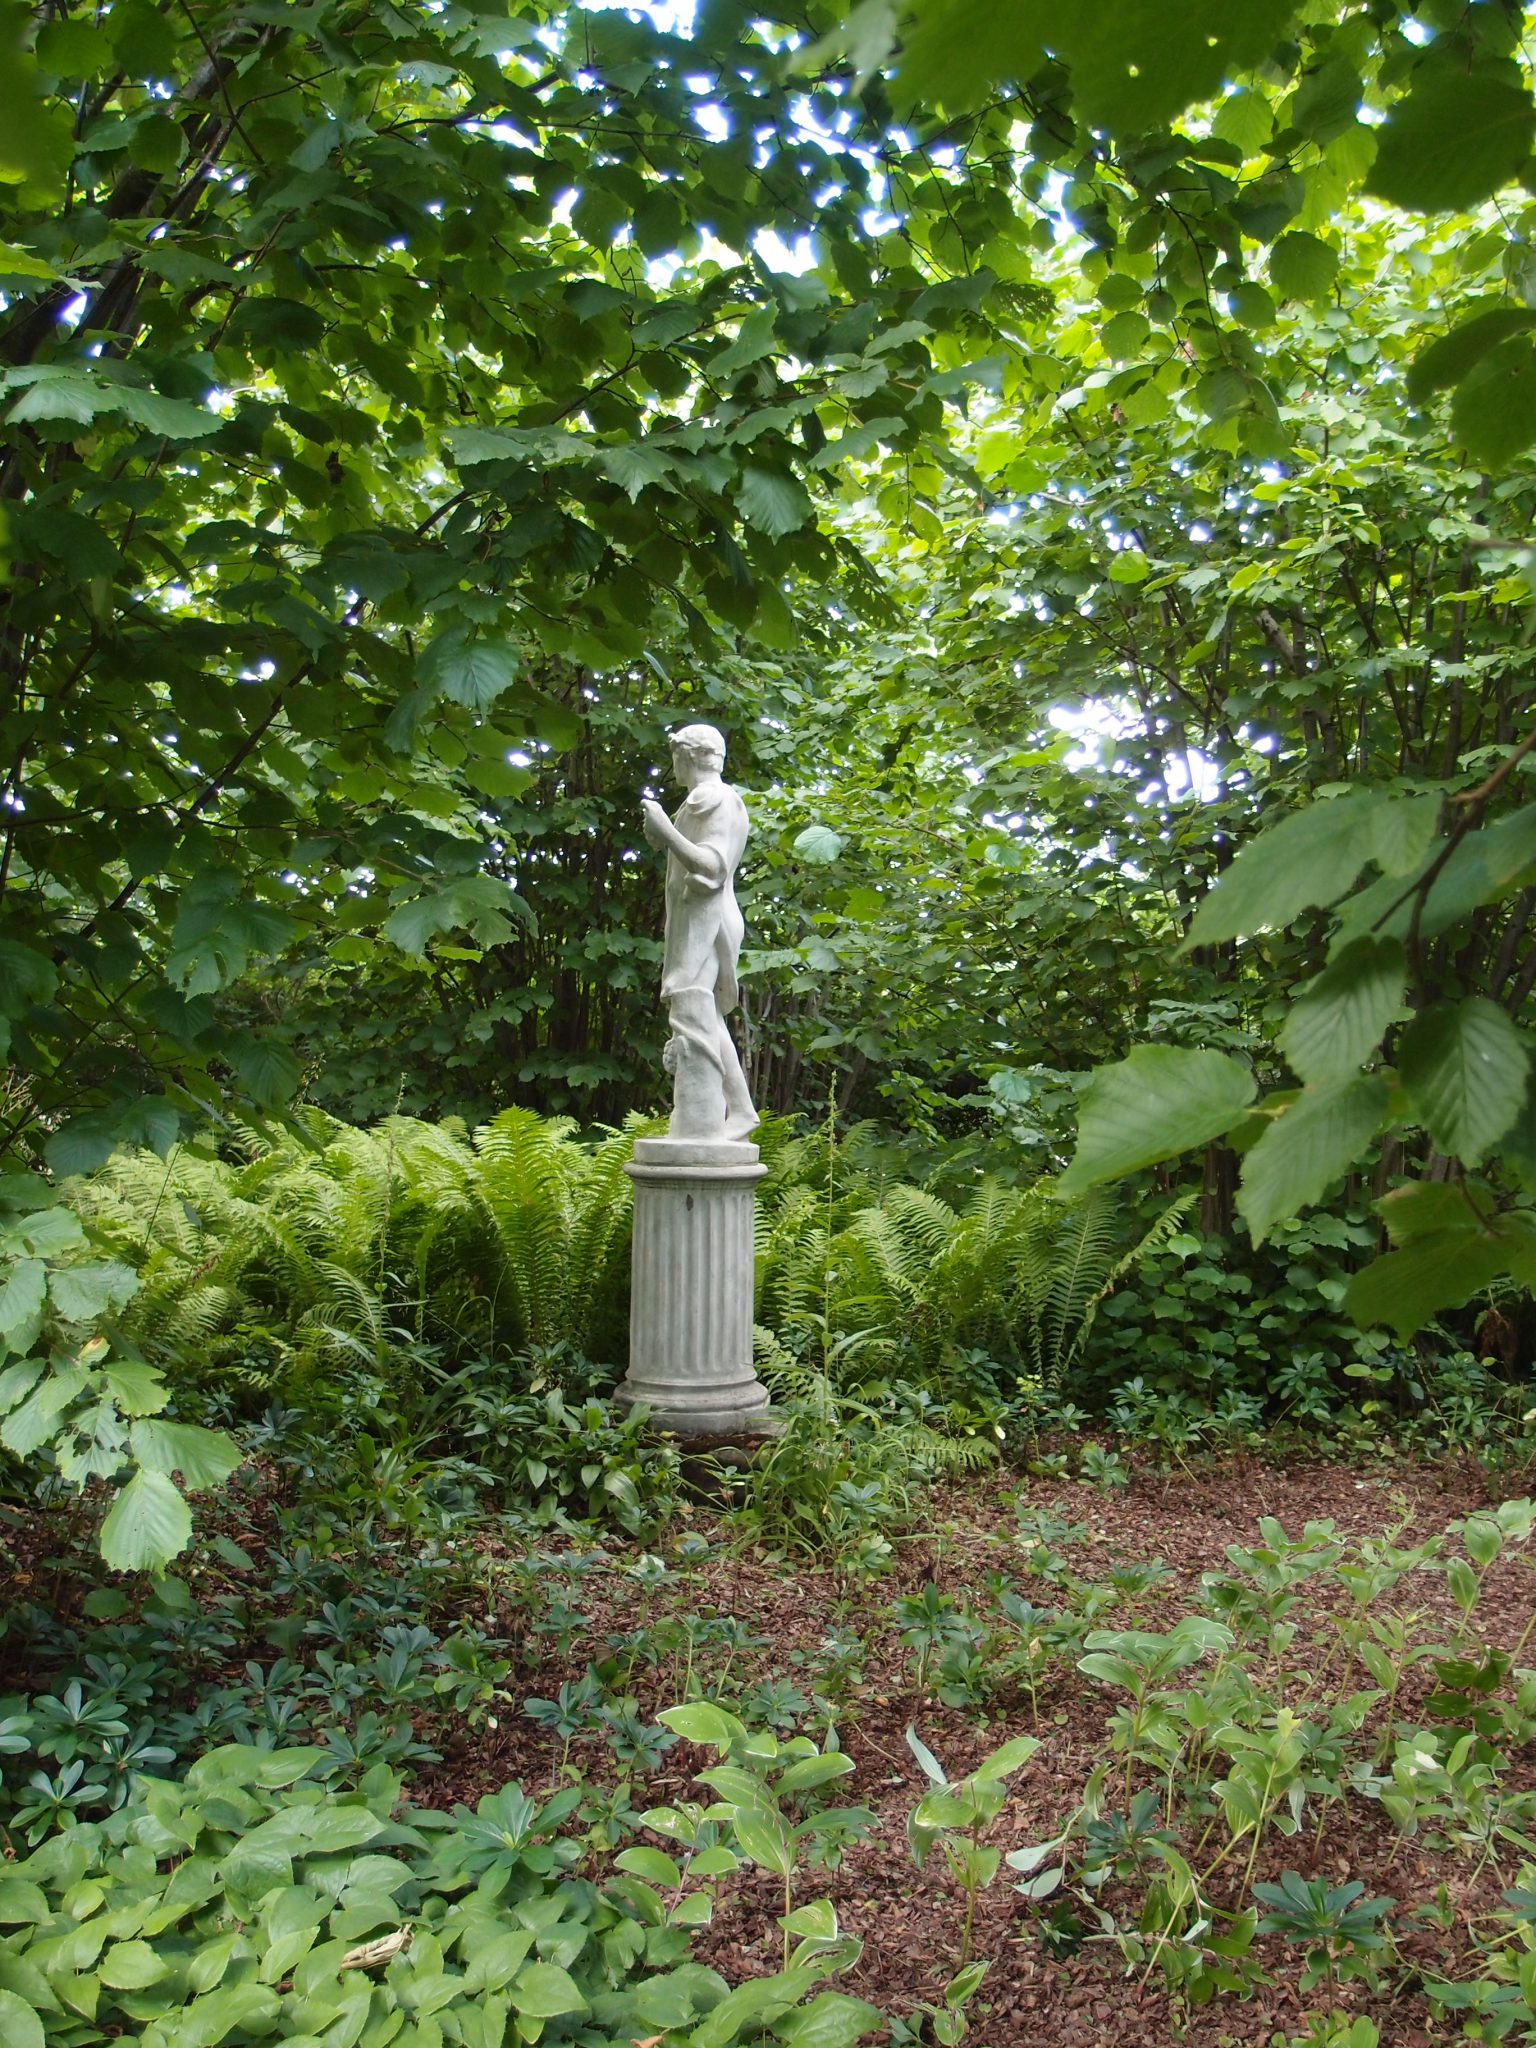 At the far end of the Spring Garden's Lime Walk, a statue marks the beginning of The Nuttery